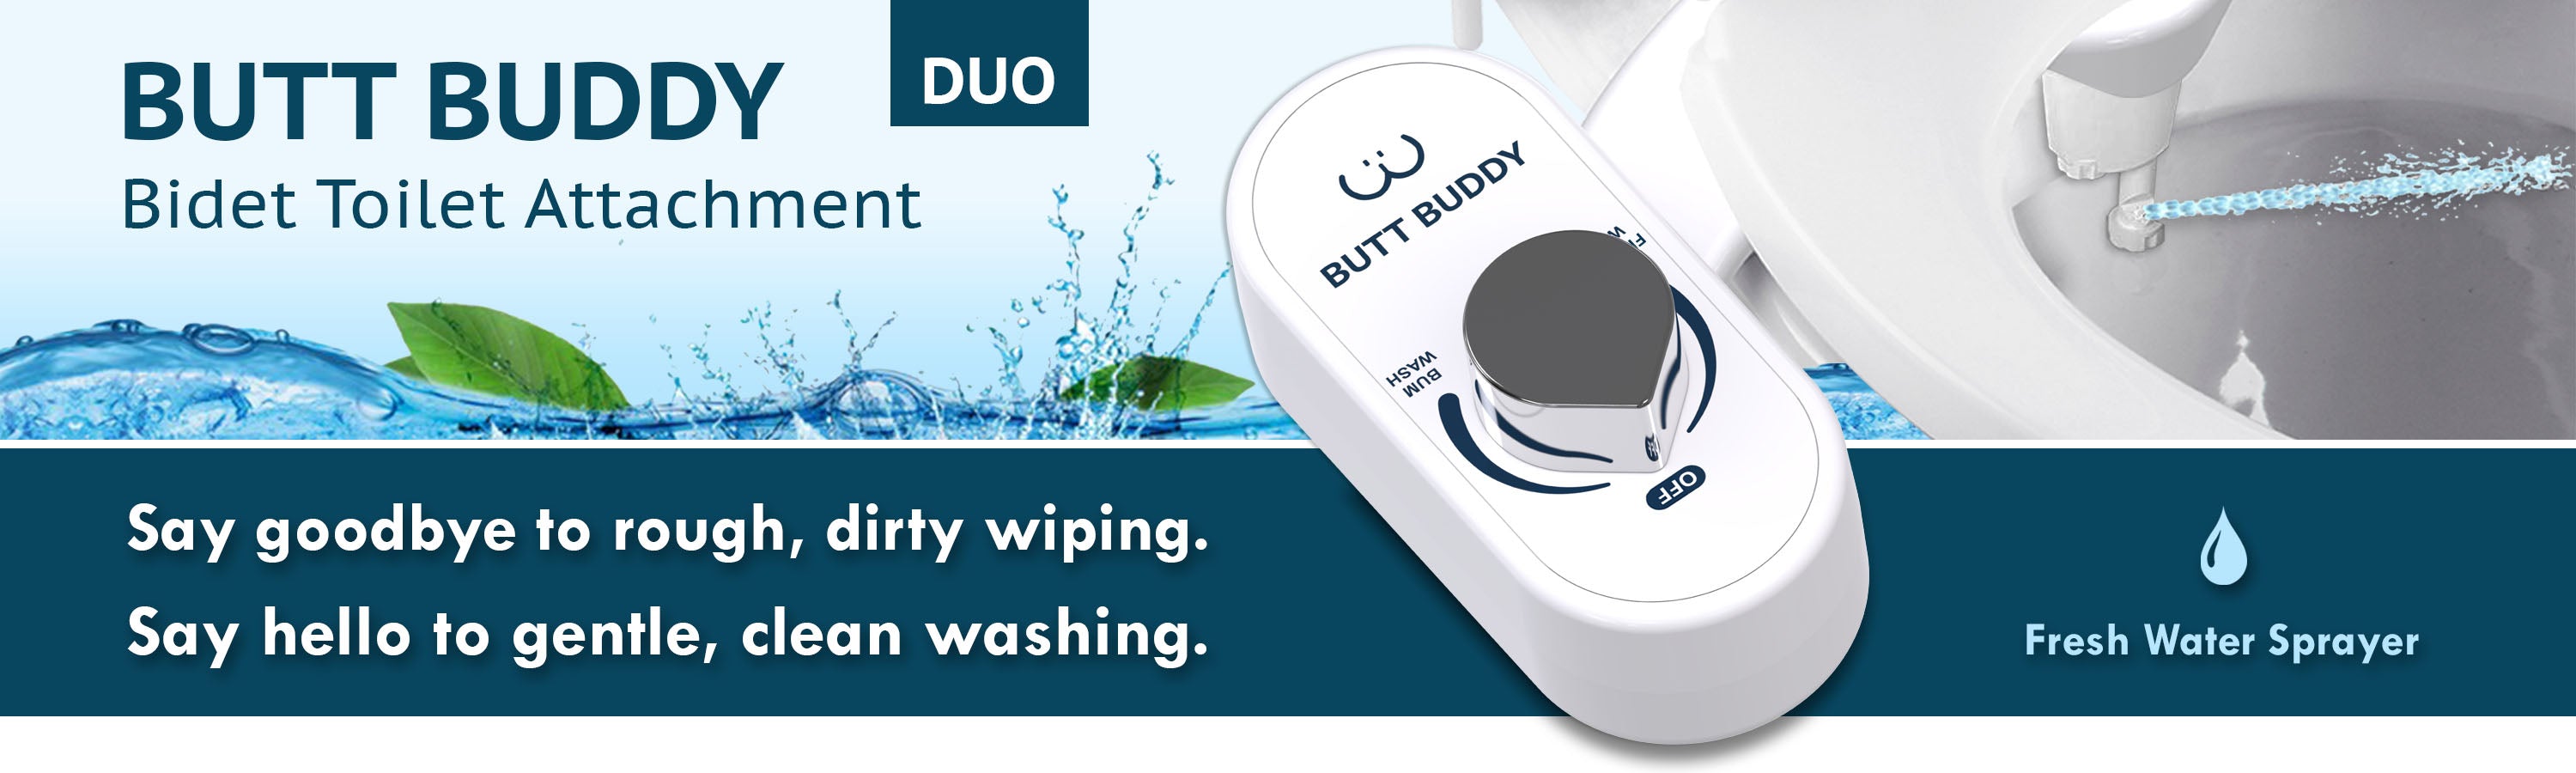 In My Bathroom - IMB - Butt Buddy - Bidet Toilet Attachment - Fresh Water Sprayer - Stop Dirty Wiping - Start Clean Washing - Product Banner - BBB